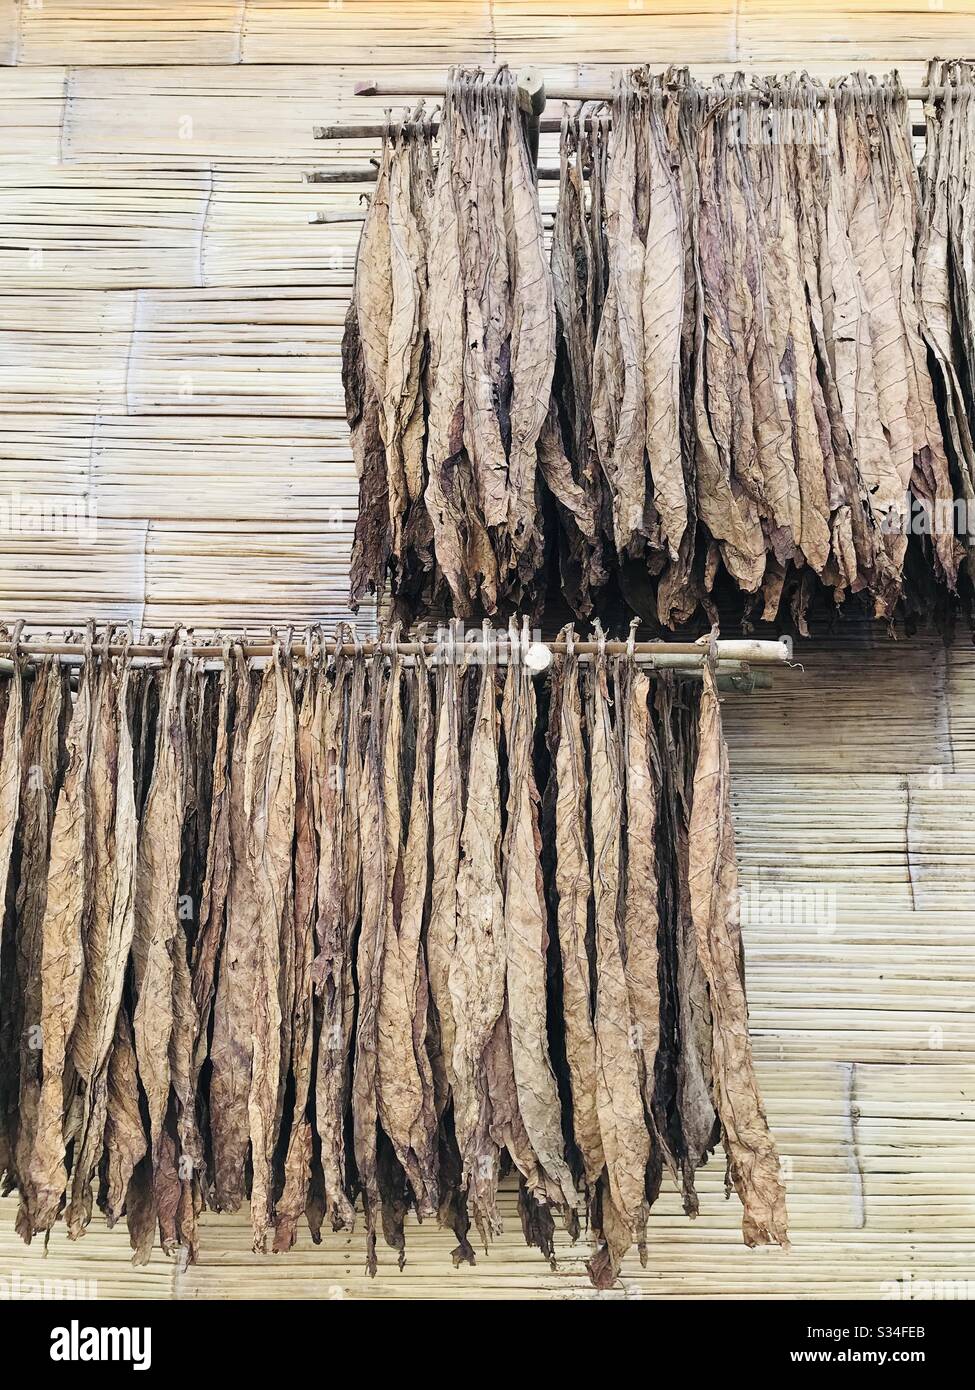 Tobacco leaves are hang dried under the sun for about two weeks. This a curing process integral in obtaining the quality and character of the leaves. Stock Photo